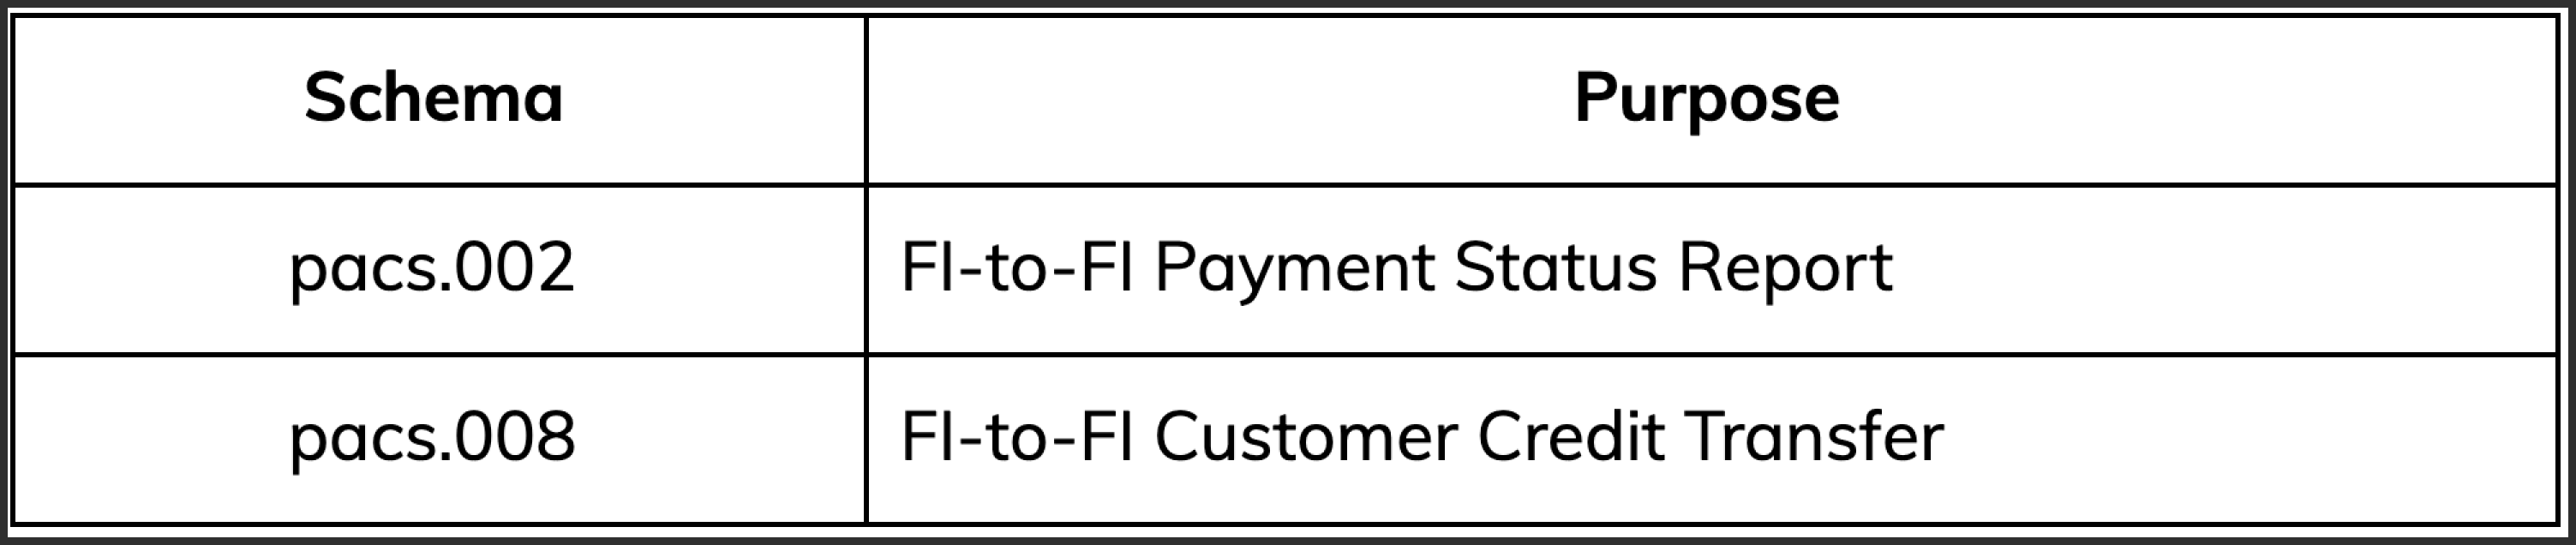 Table of RTP Payments Clearing and Settlement schema and their purpose